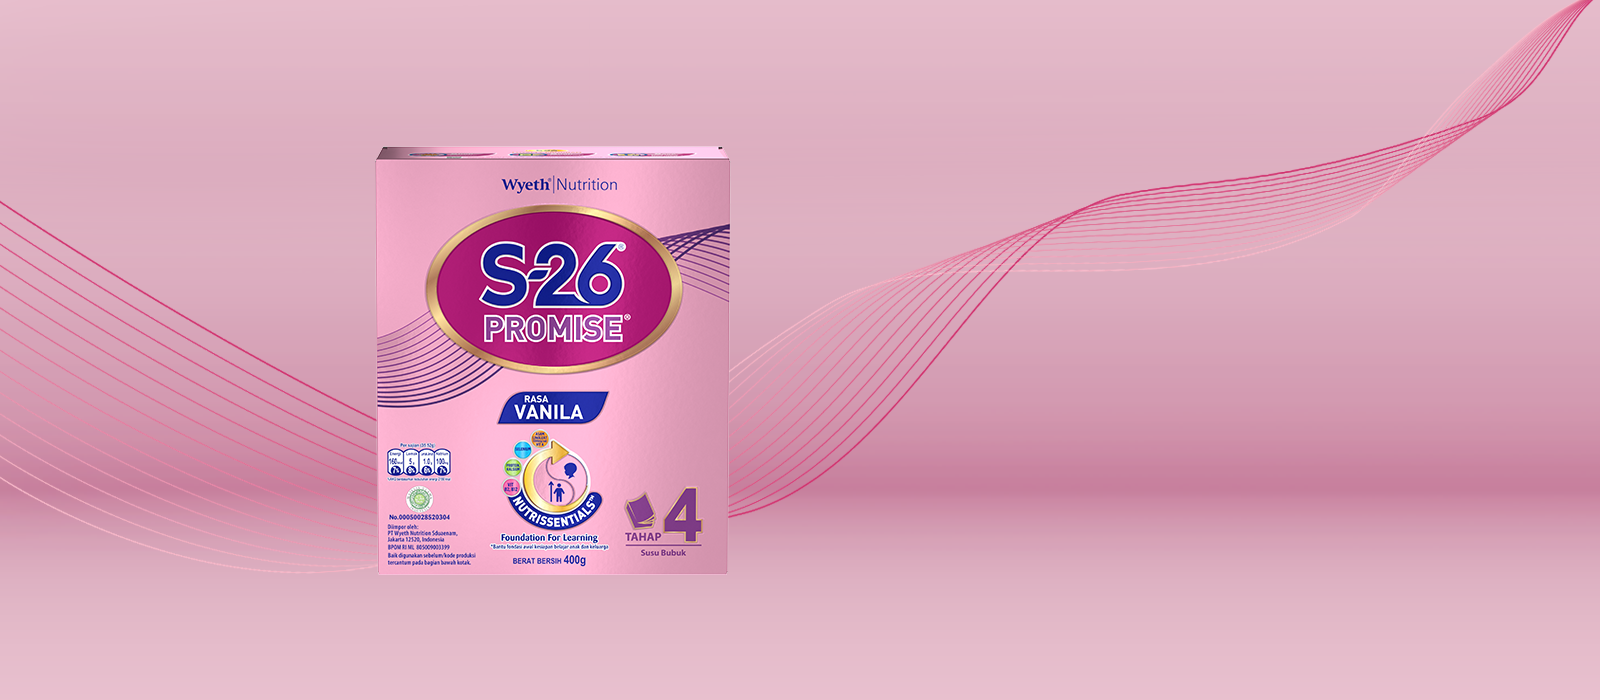 Product_Promise_OG_1600x700.png 